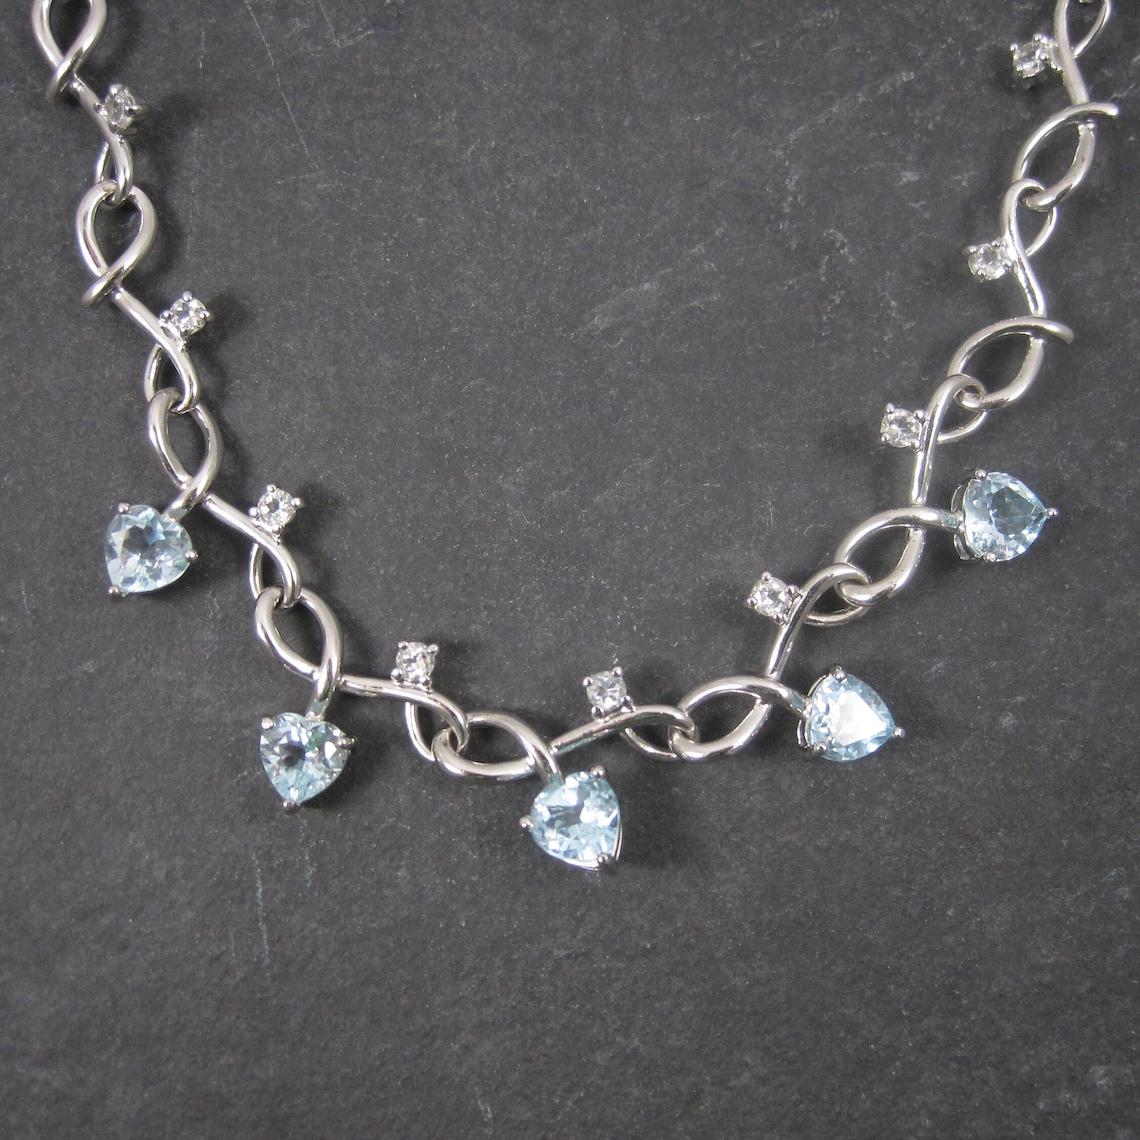 This beautiful necklace is sterling silver.

Each of the genuine London blue heart cut topaz stones weighs 1 carat for a total of 5 carats.
There are 17 round cut 3.5mm white zircons that accent the chain throughout.

It measures 18 inches with an